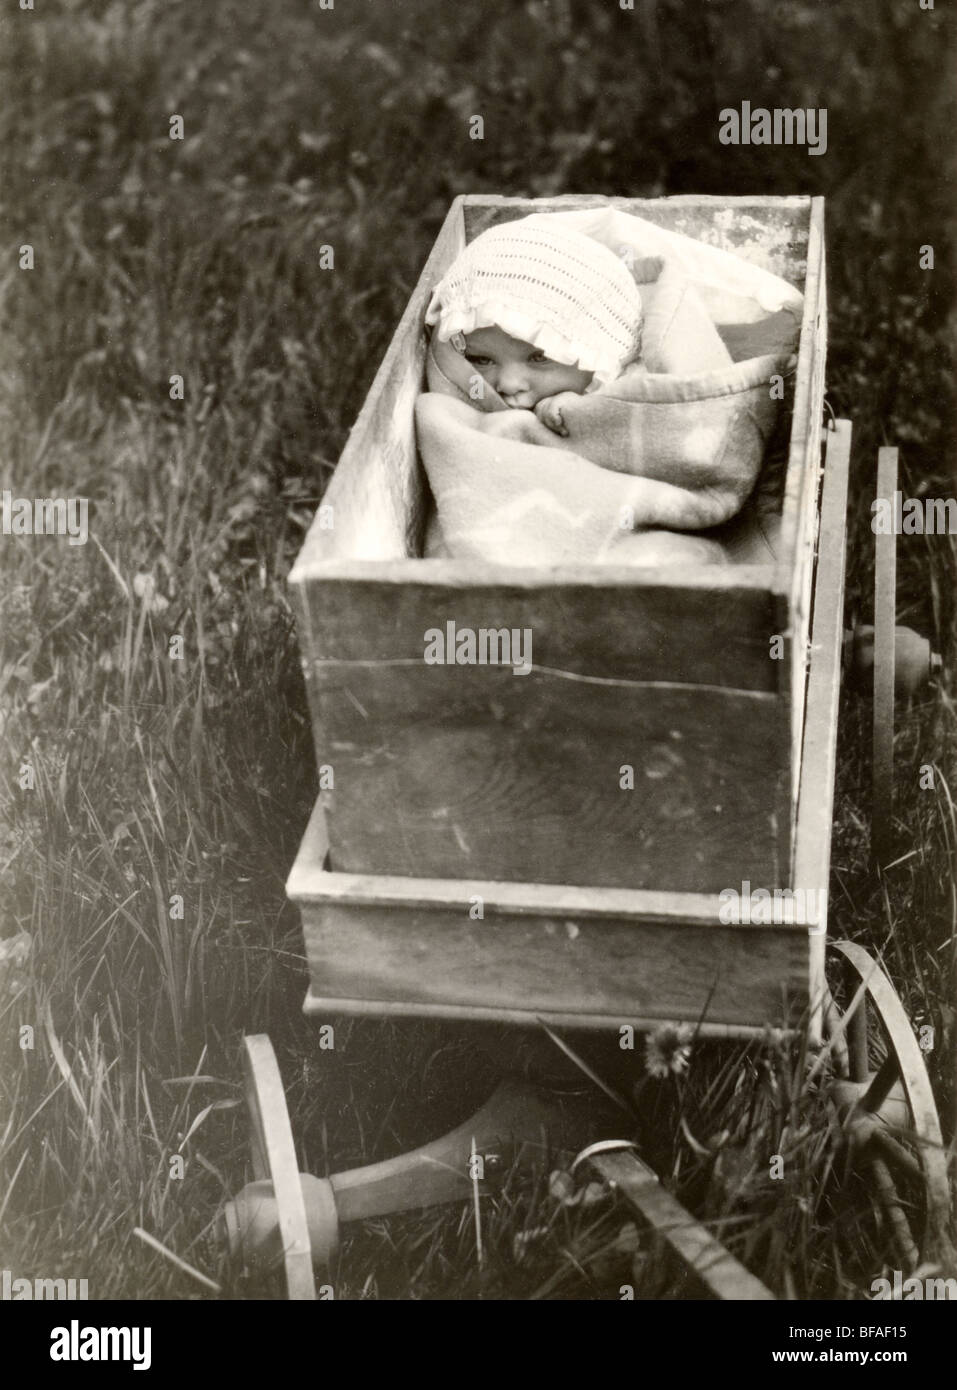 Infant Tightly Packed in Toy Wagon Stock Photo